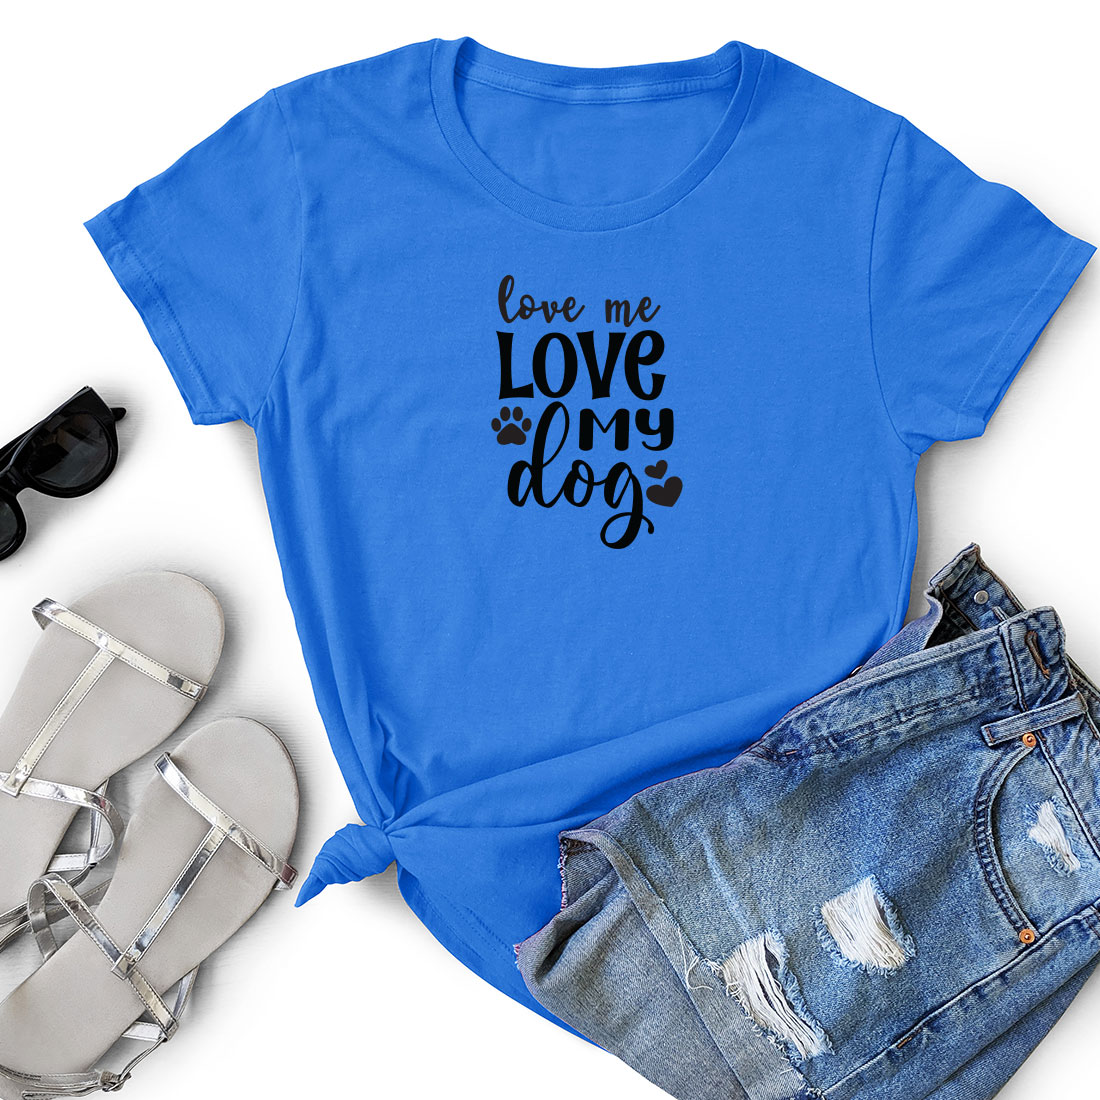 T - shirt that says love me.